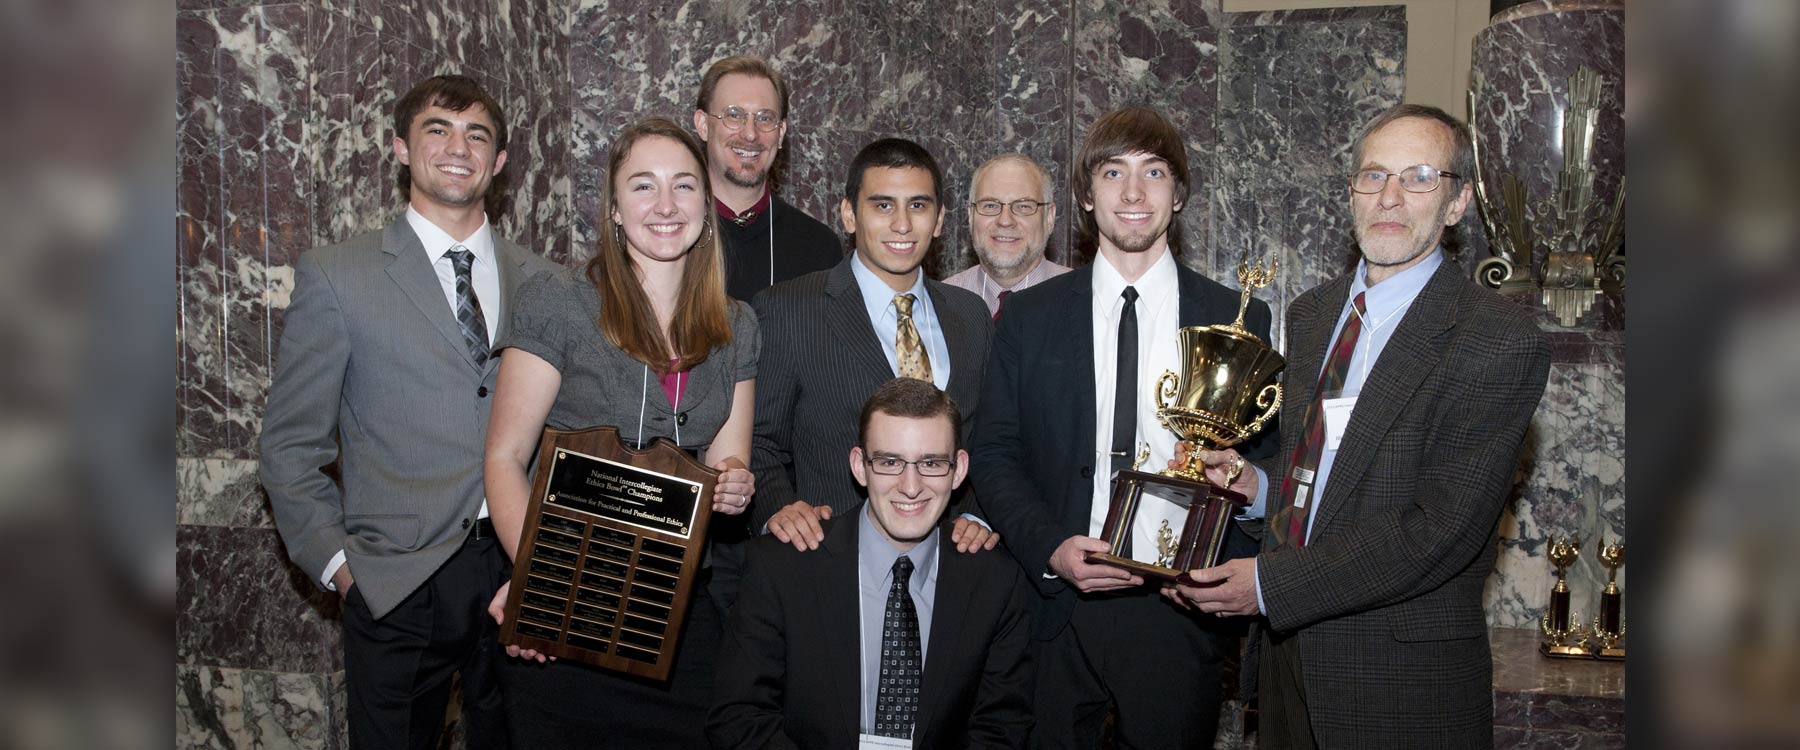 Professionally dressed students and coaches pose for a group photo. Two students hold up a trophy and plaque.